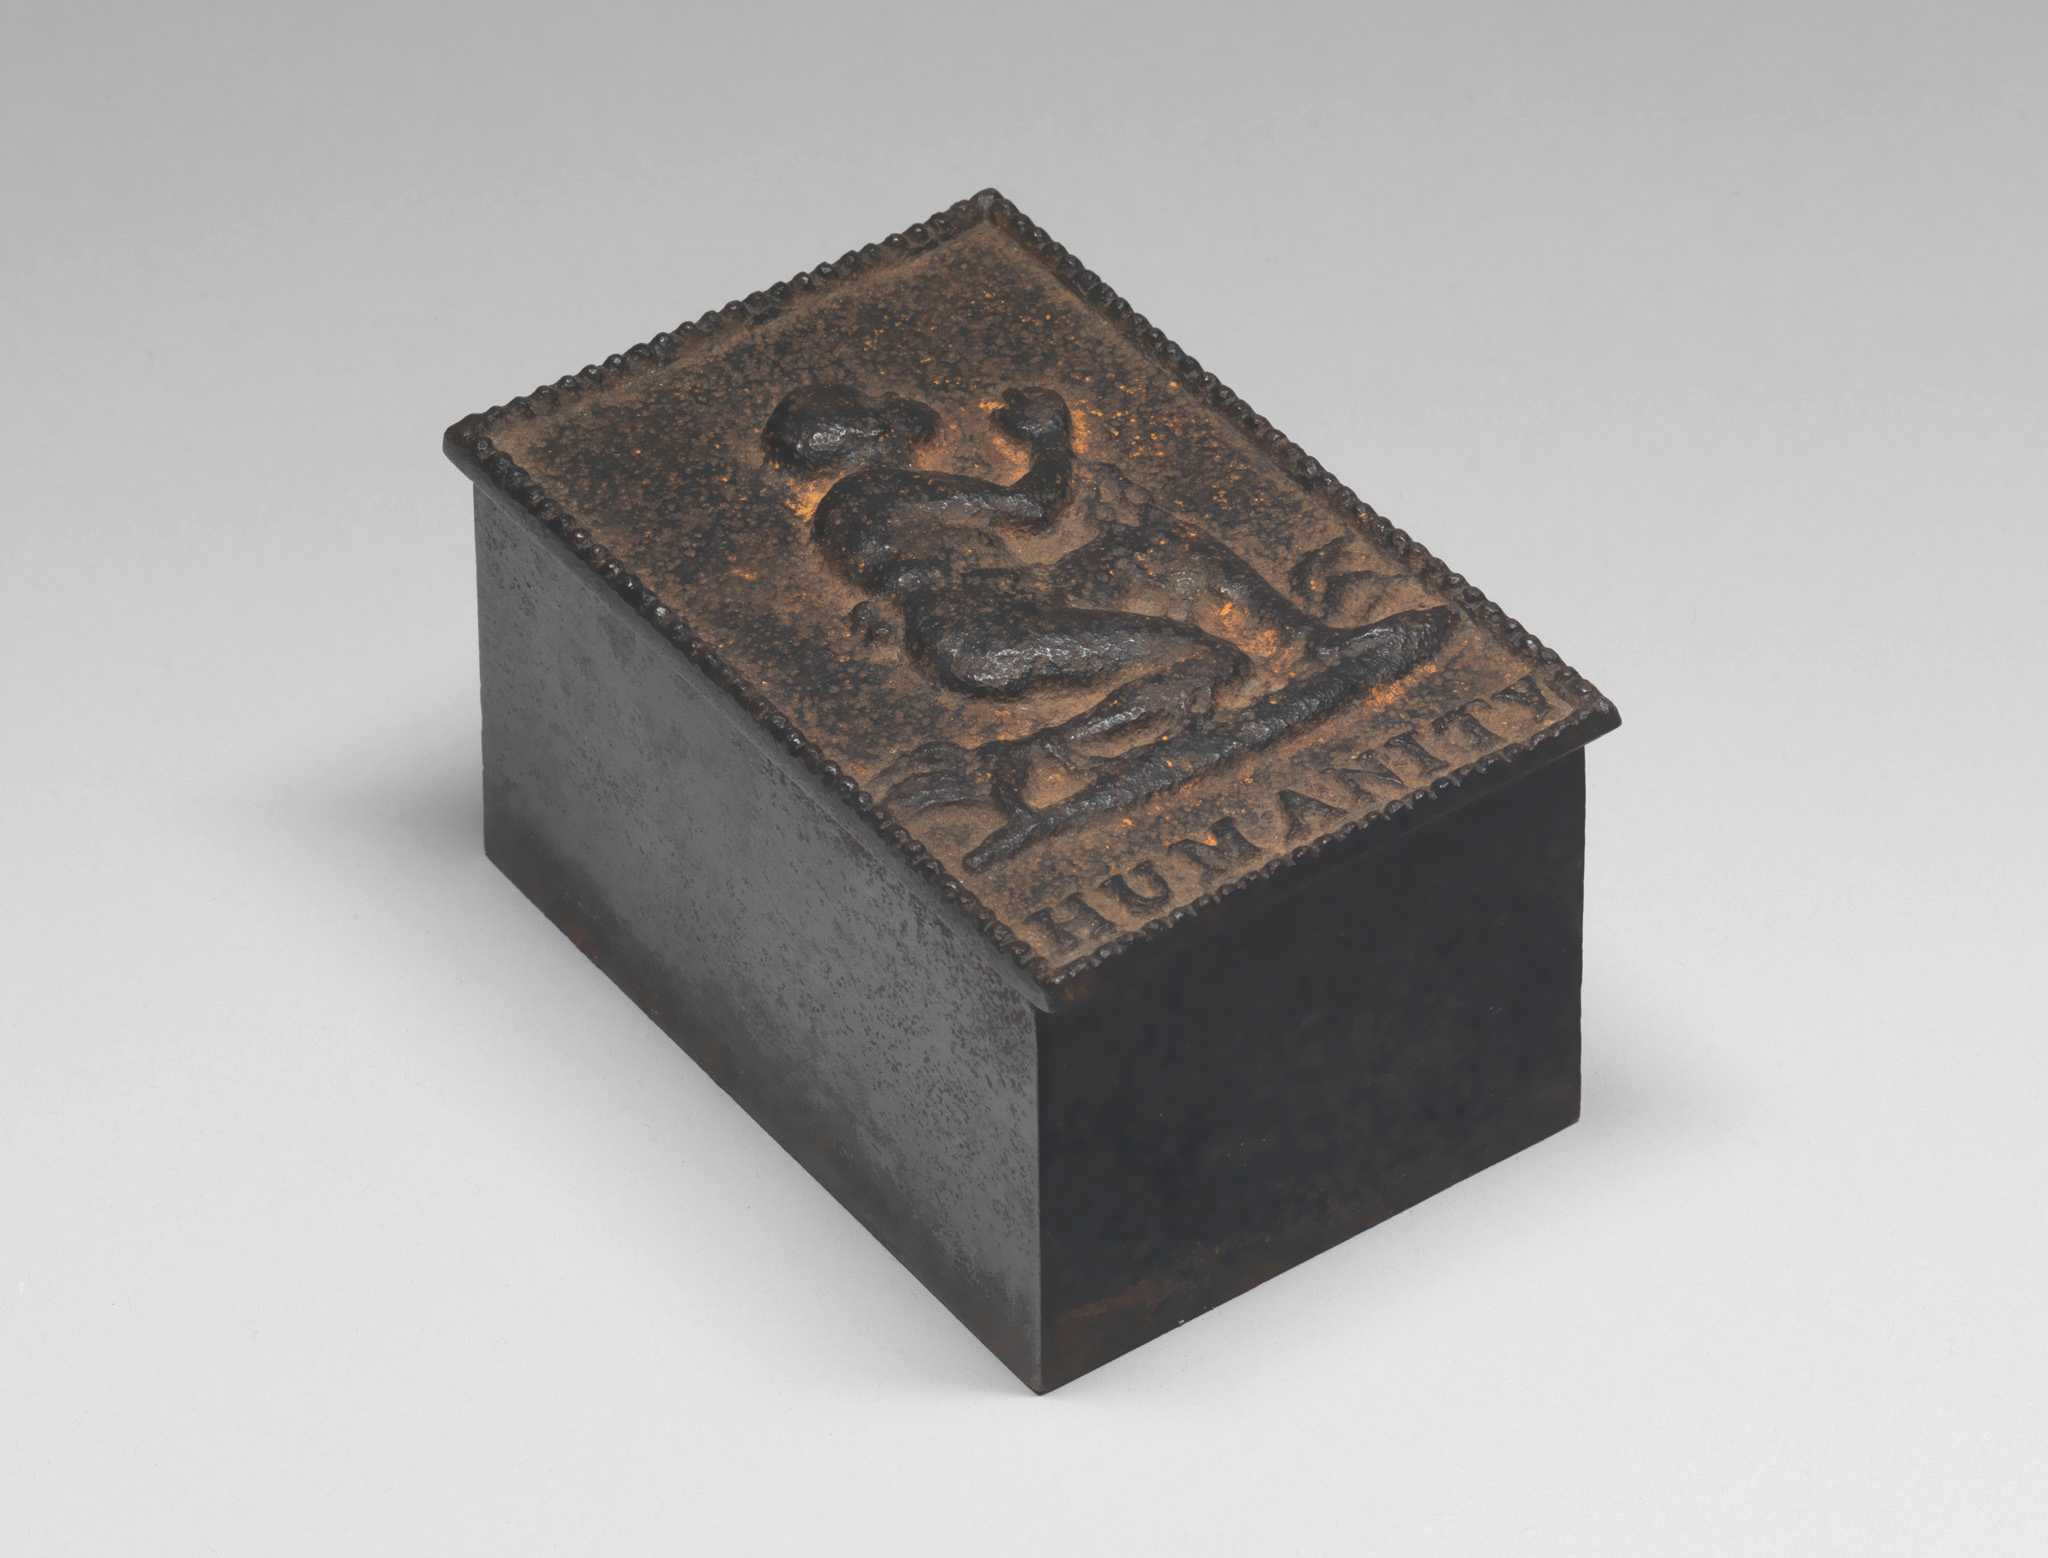 Cast iron desk box, holding a weighted roller blotter. The box bears an embossed representation of a man kneeling in chains, a famous design by Josiah Wedgewood for the English & Foreign Anti-Slavery Society. The single word "HUMANITY" appears below the figure and a raised, decorative border is around the edge. The box contains a brass topped iron piece with a slightly curved bottom.